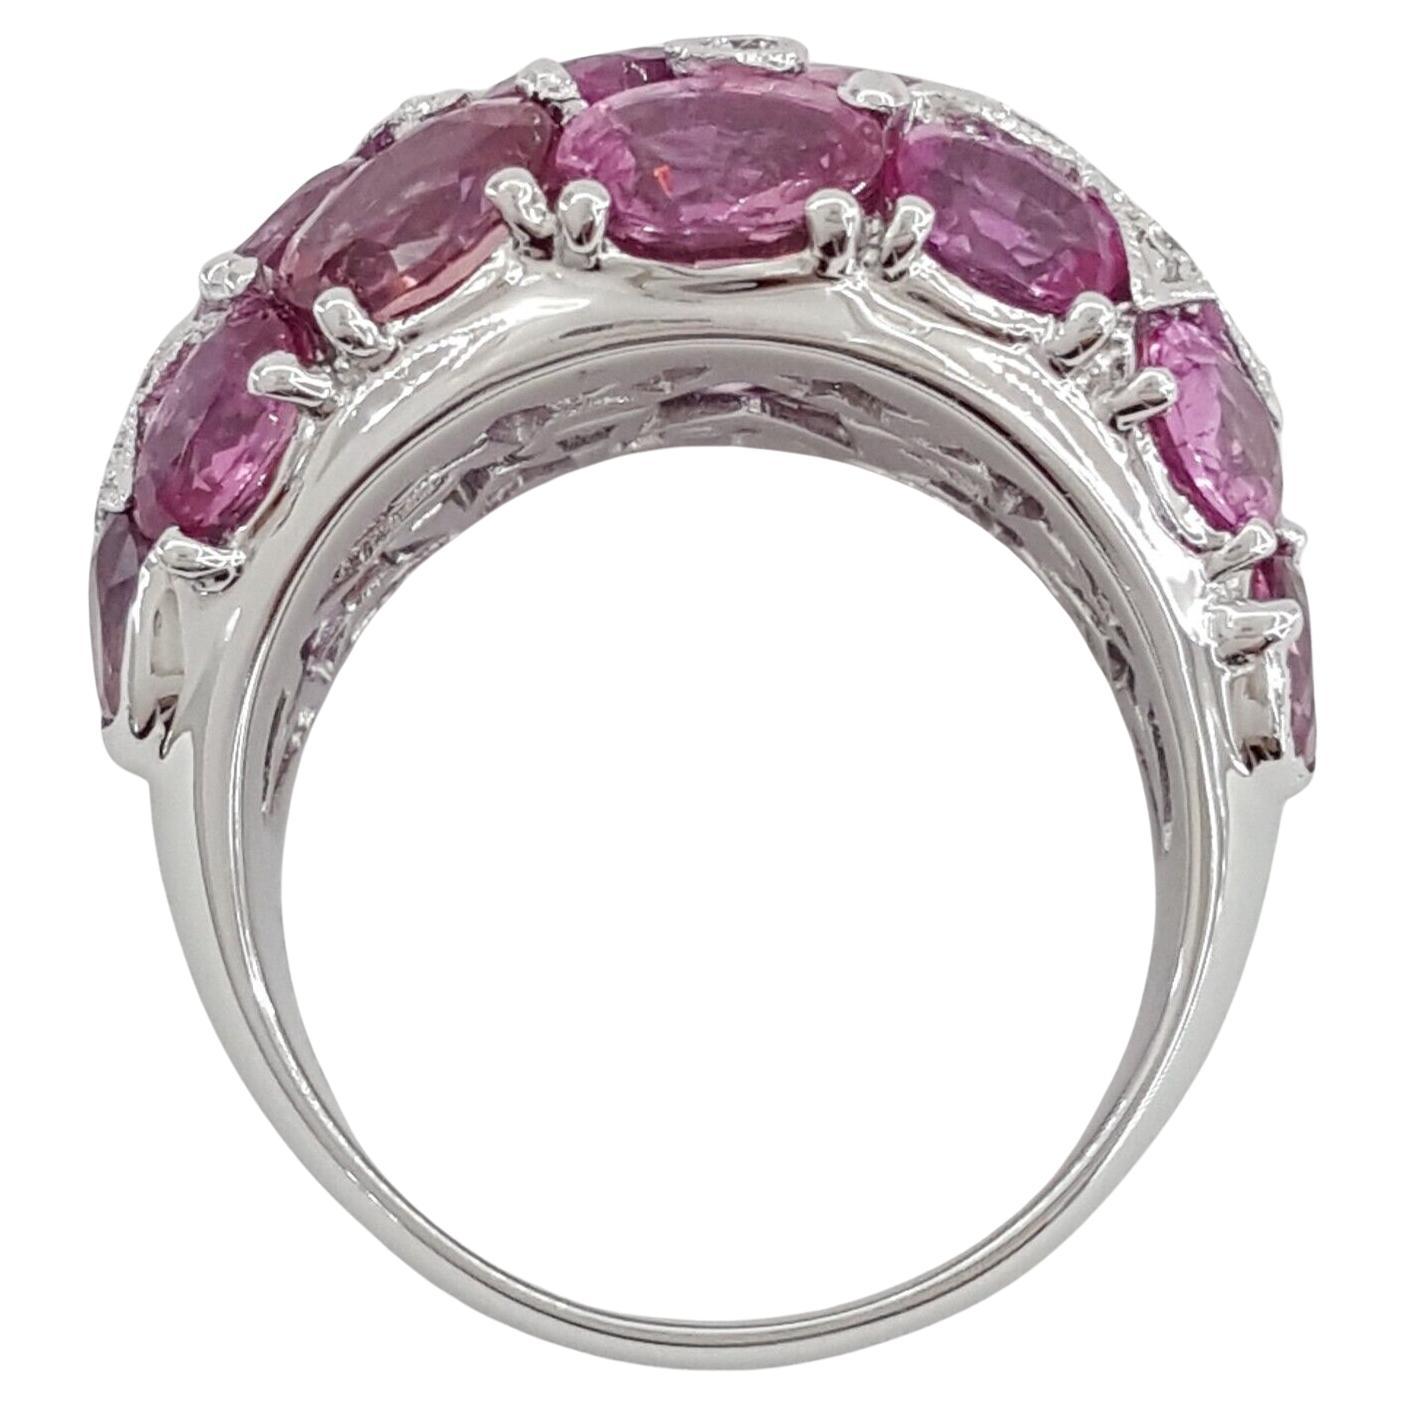 This exquisite Cocktail/Statement Ring in 18k White Gold showcases a total weight of 12.14 carats. Weighing 12.5 grams and sized at 6.75 (suitable for finger sizes 6.25-6.75 due to its width), the ring features 20 Natural Pink Sapphires,